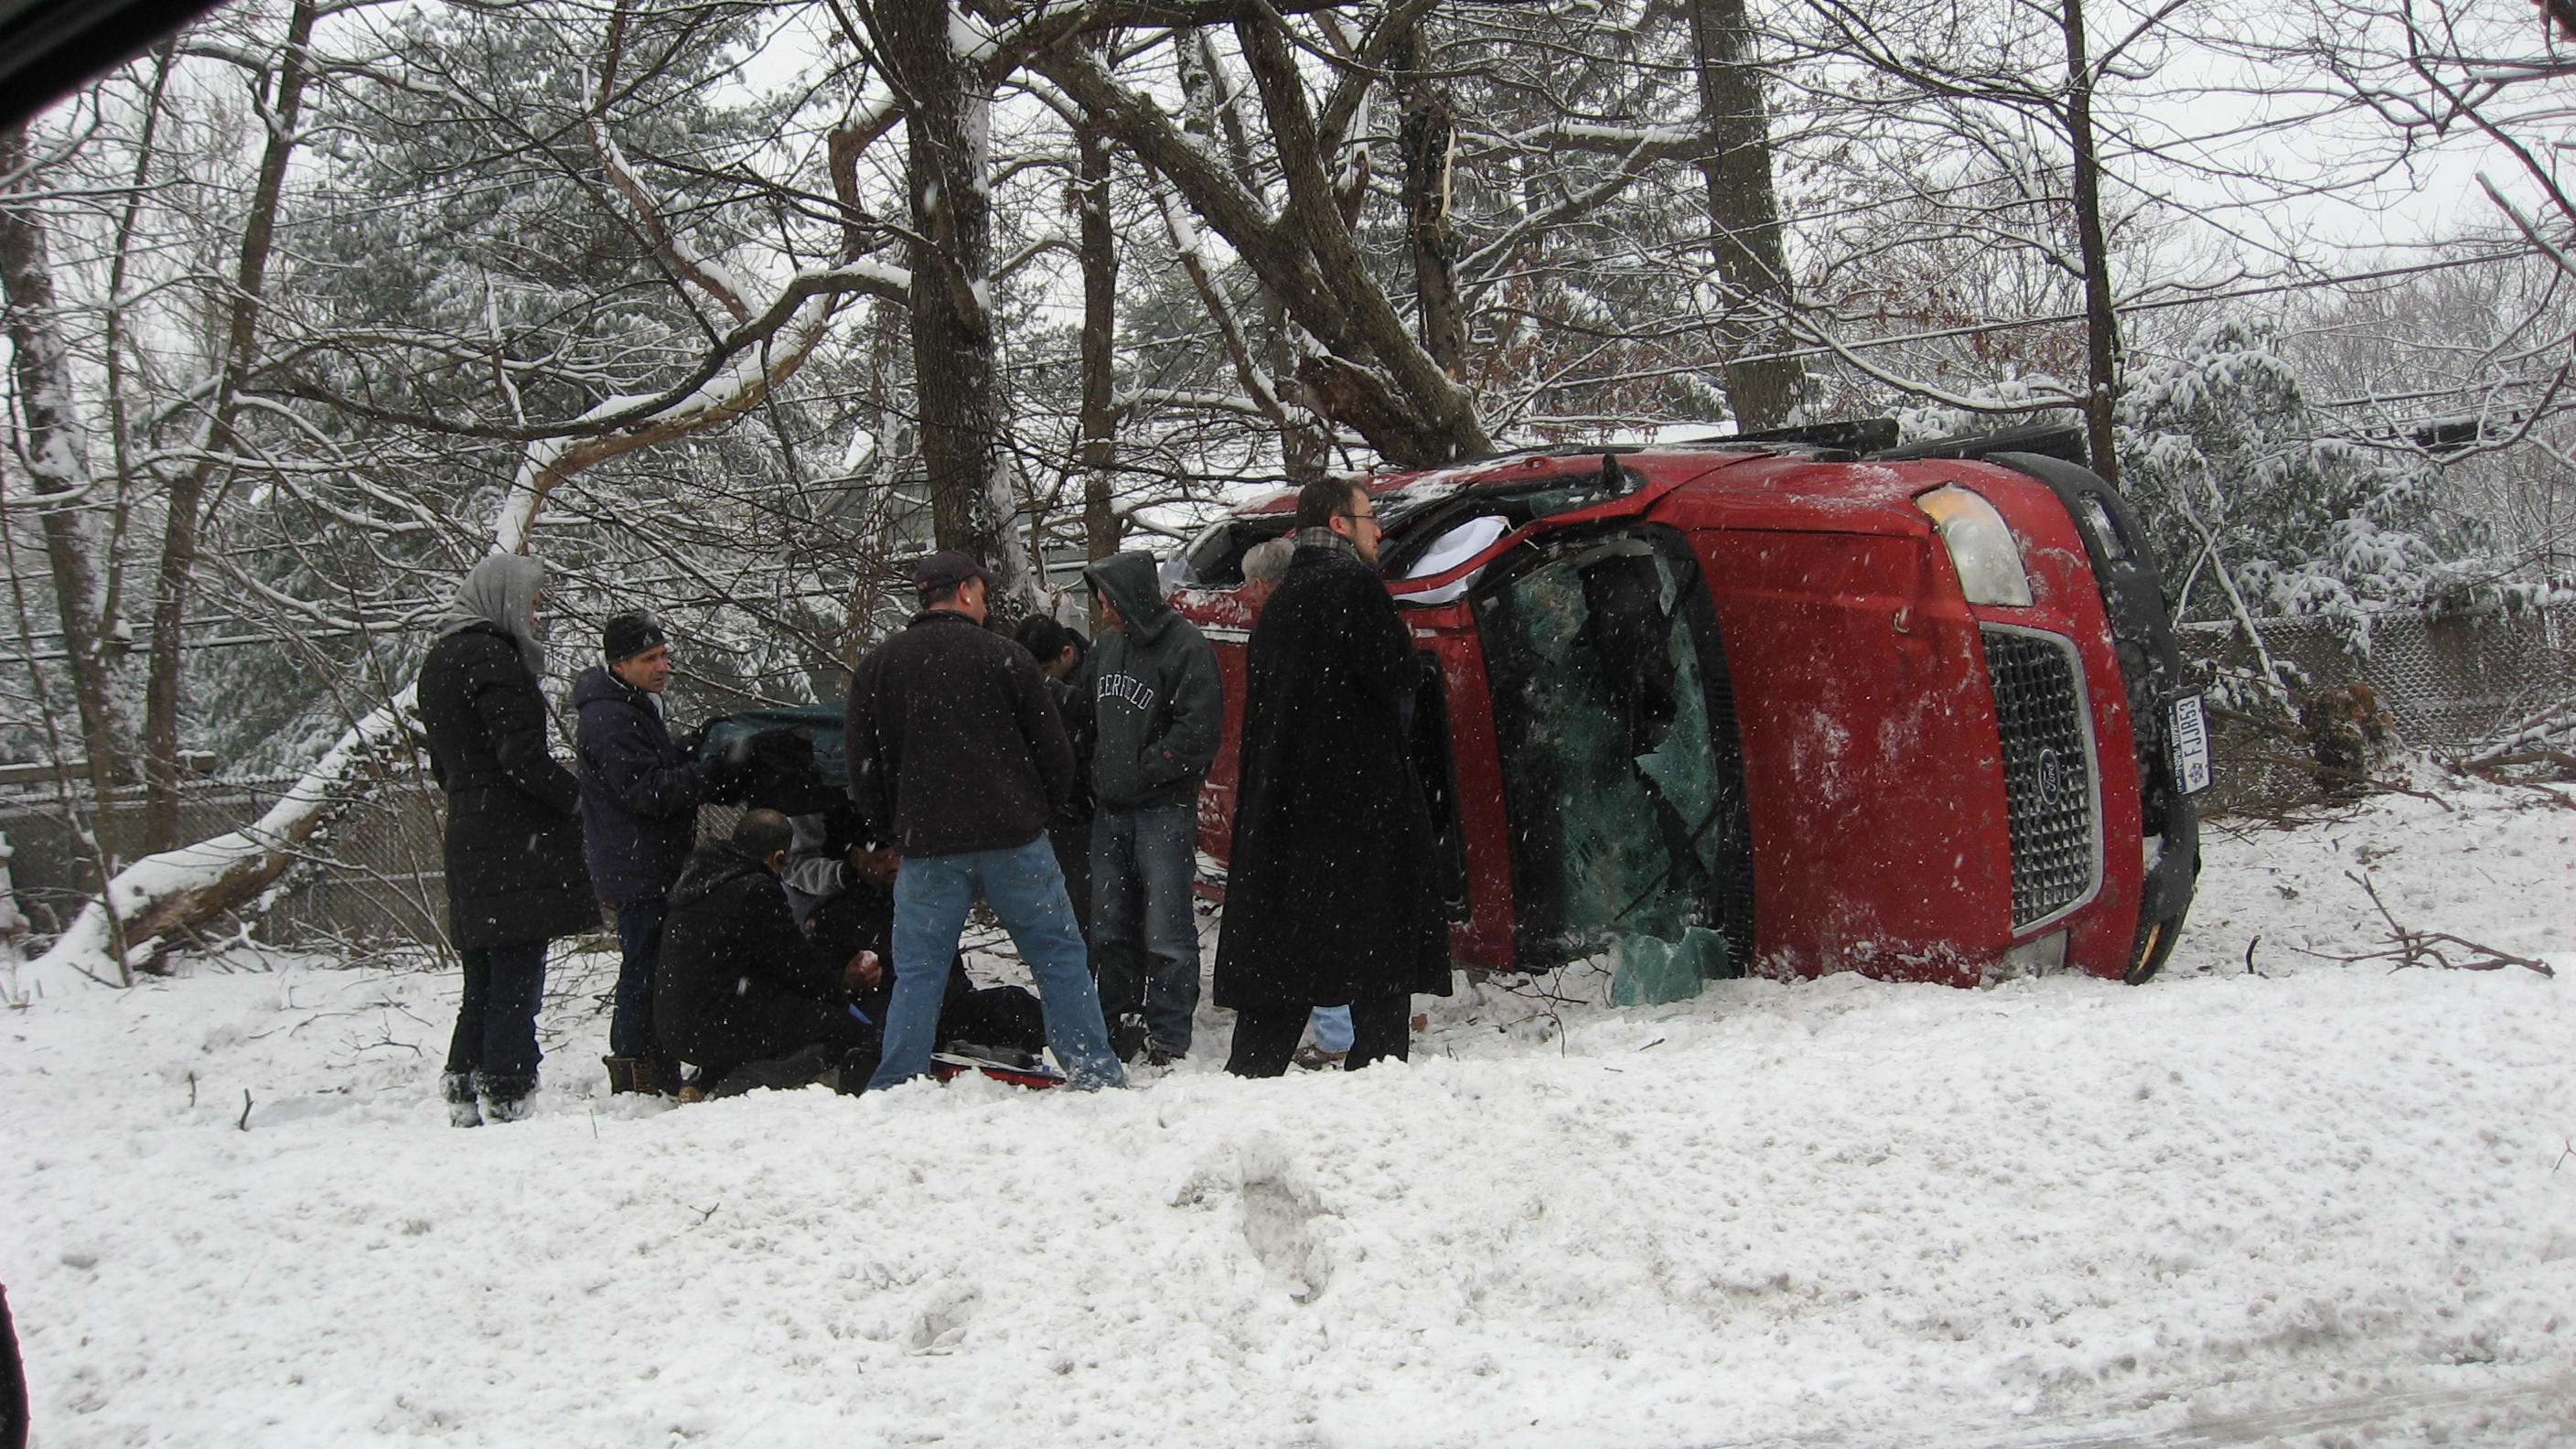 Car Overturned In Snow 